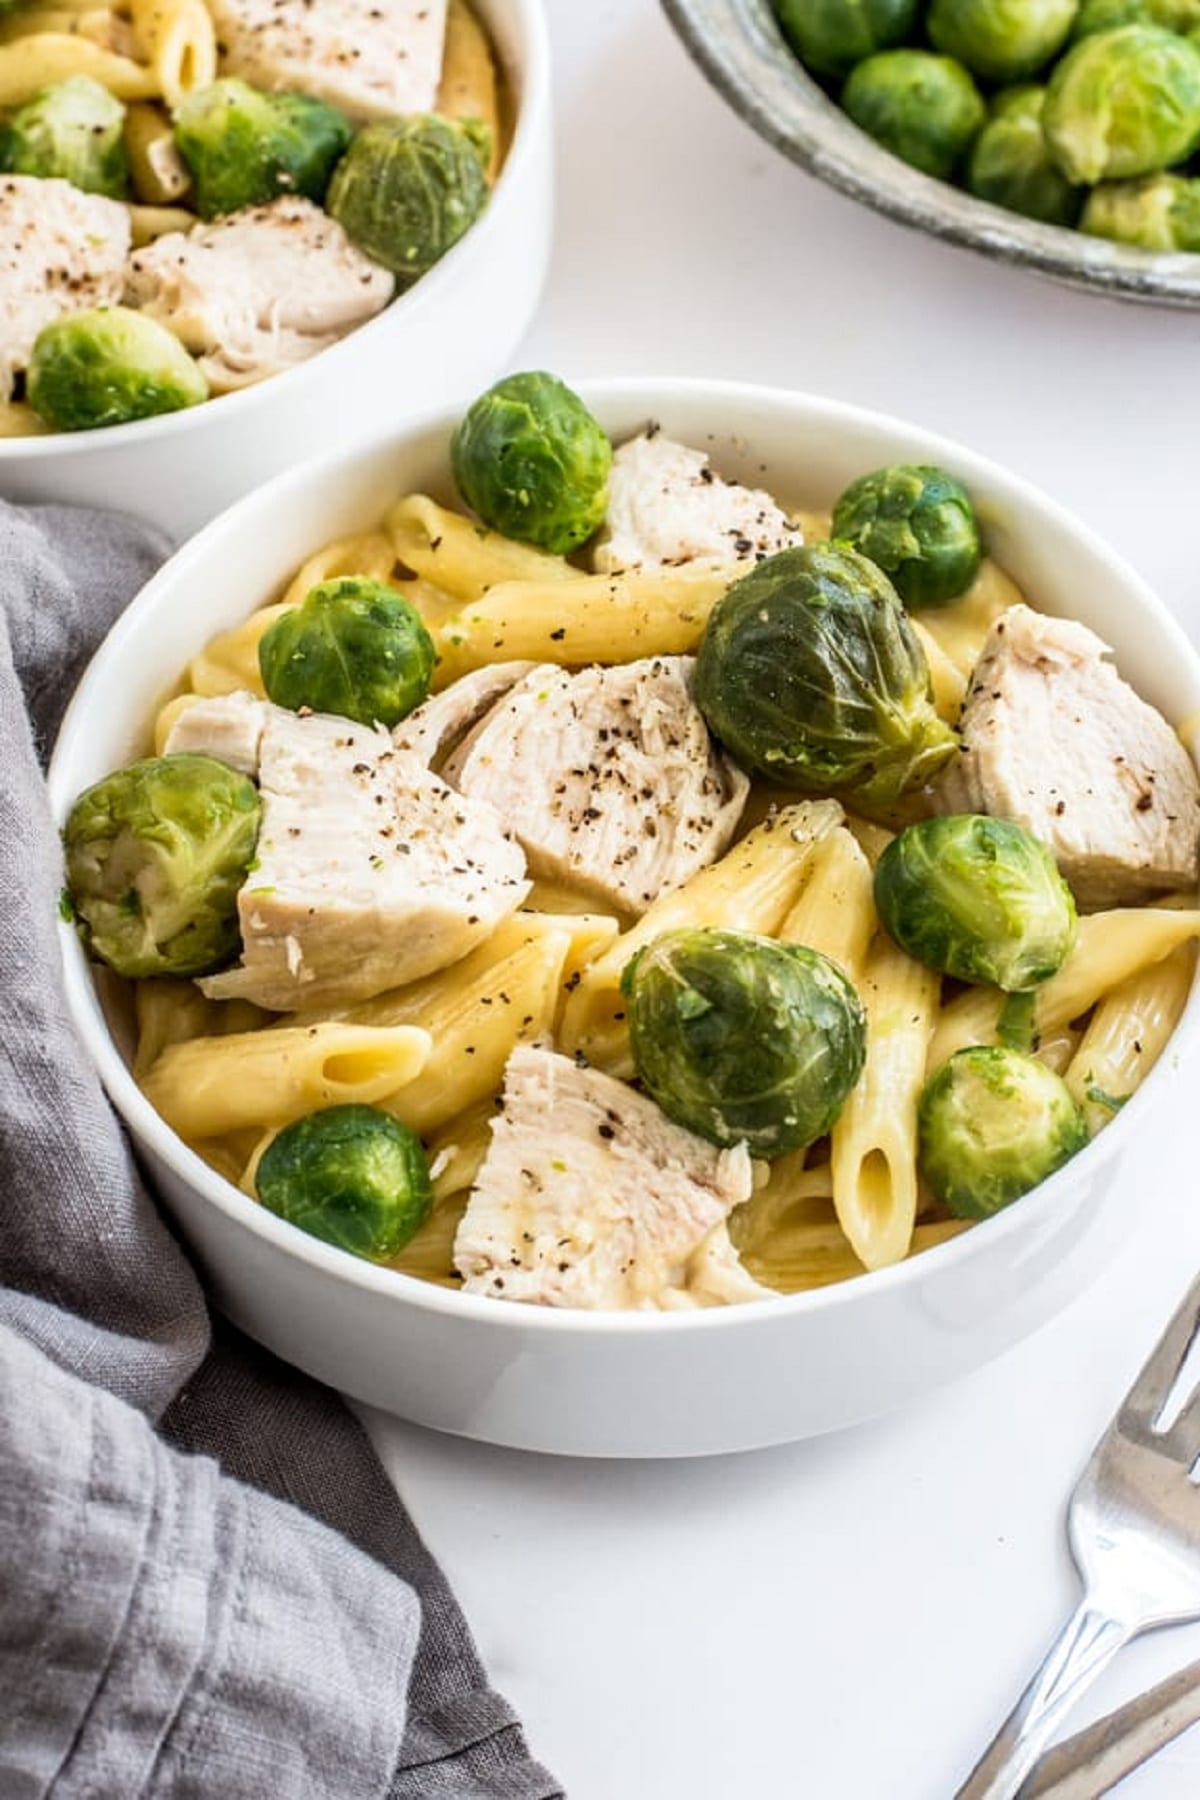 Creamy chicken pasta topped with brussels sprouts and sliced chicken